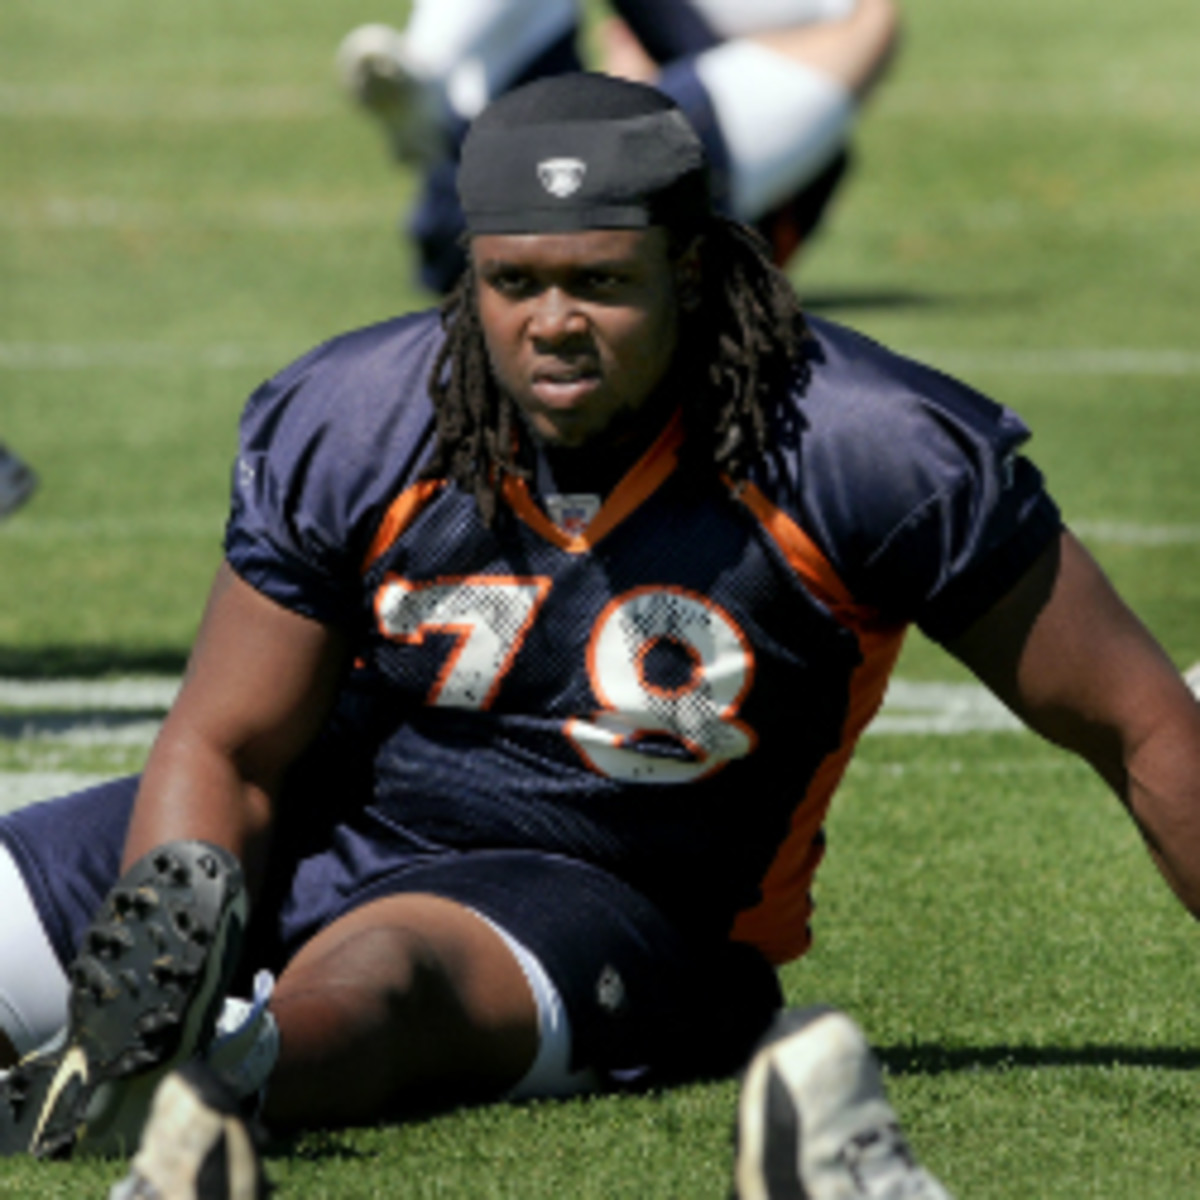 Broncos tackle Ryan Clady will need offseason shoulder surgery. (Steve Dykes/Getty Images)